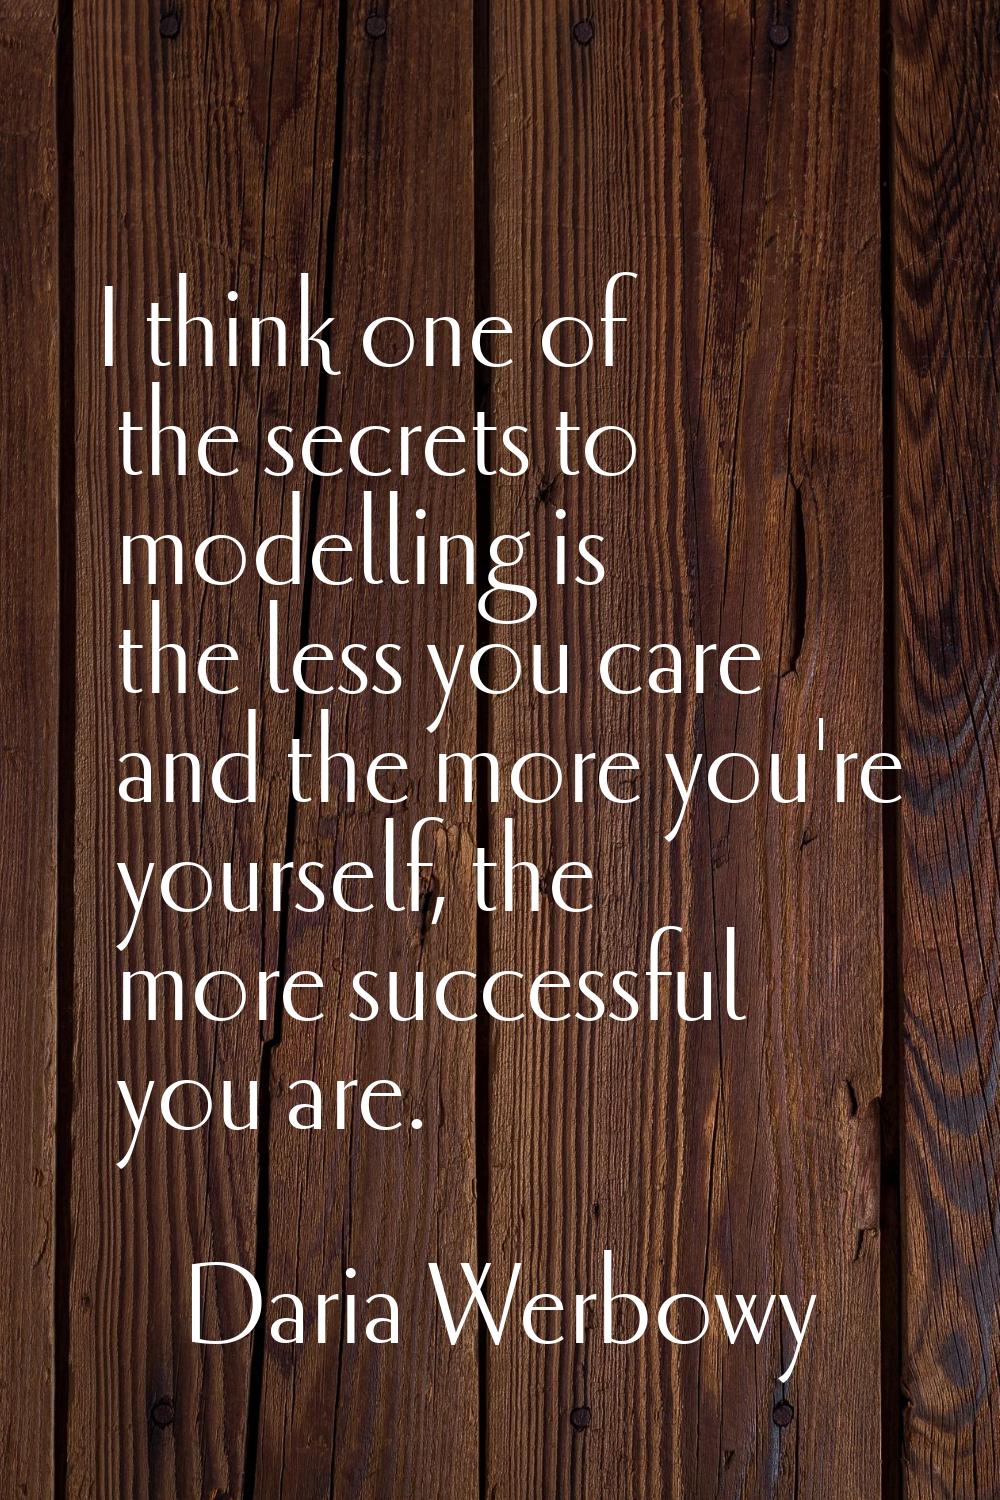 I think one of the secrets to modelling is the less you care and the more you're yourself, the more